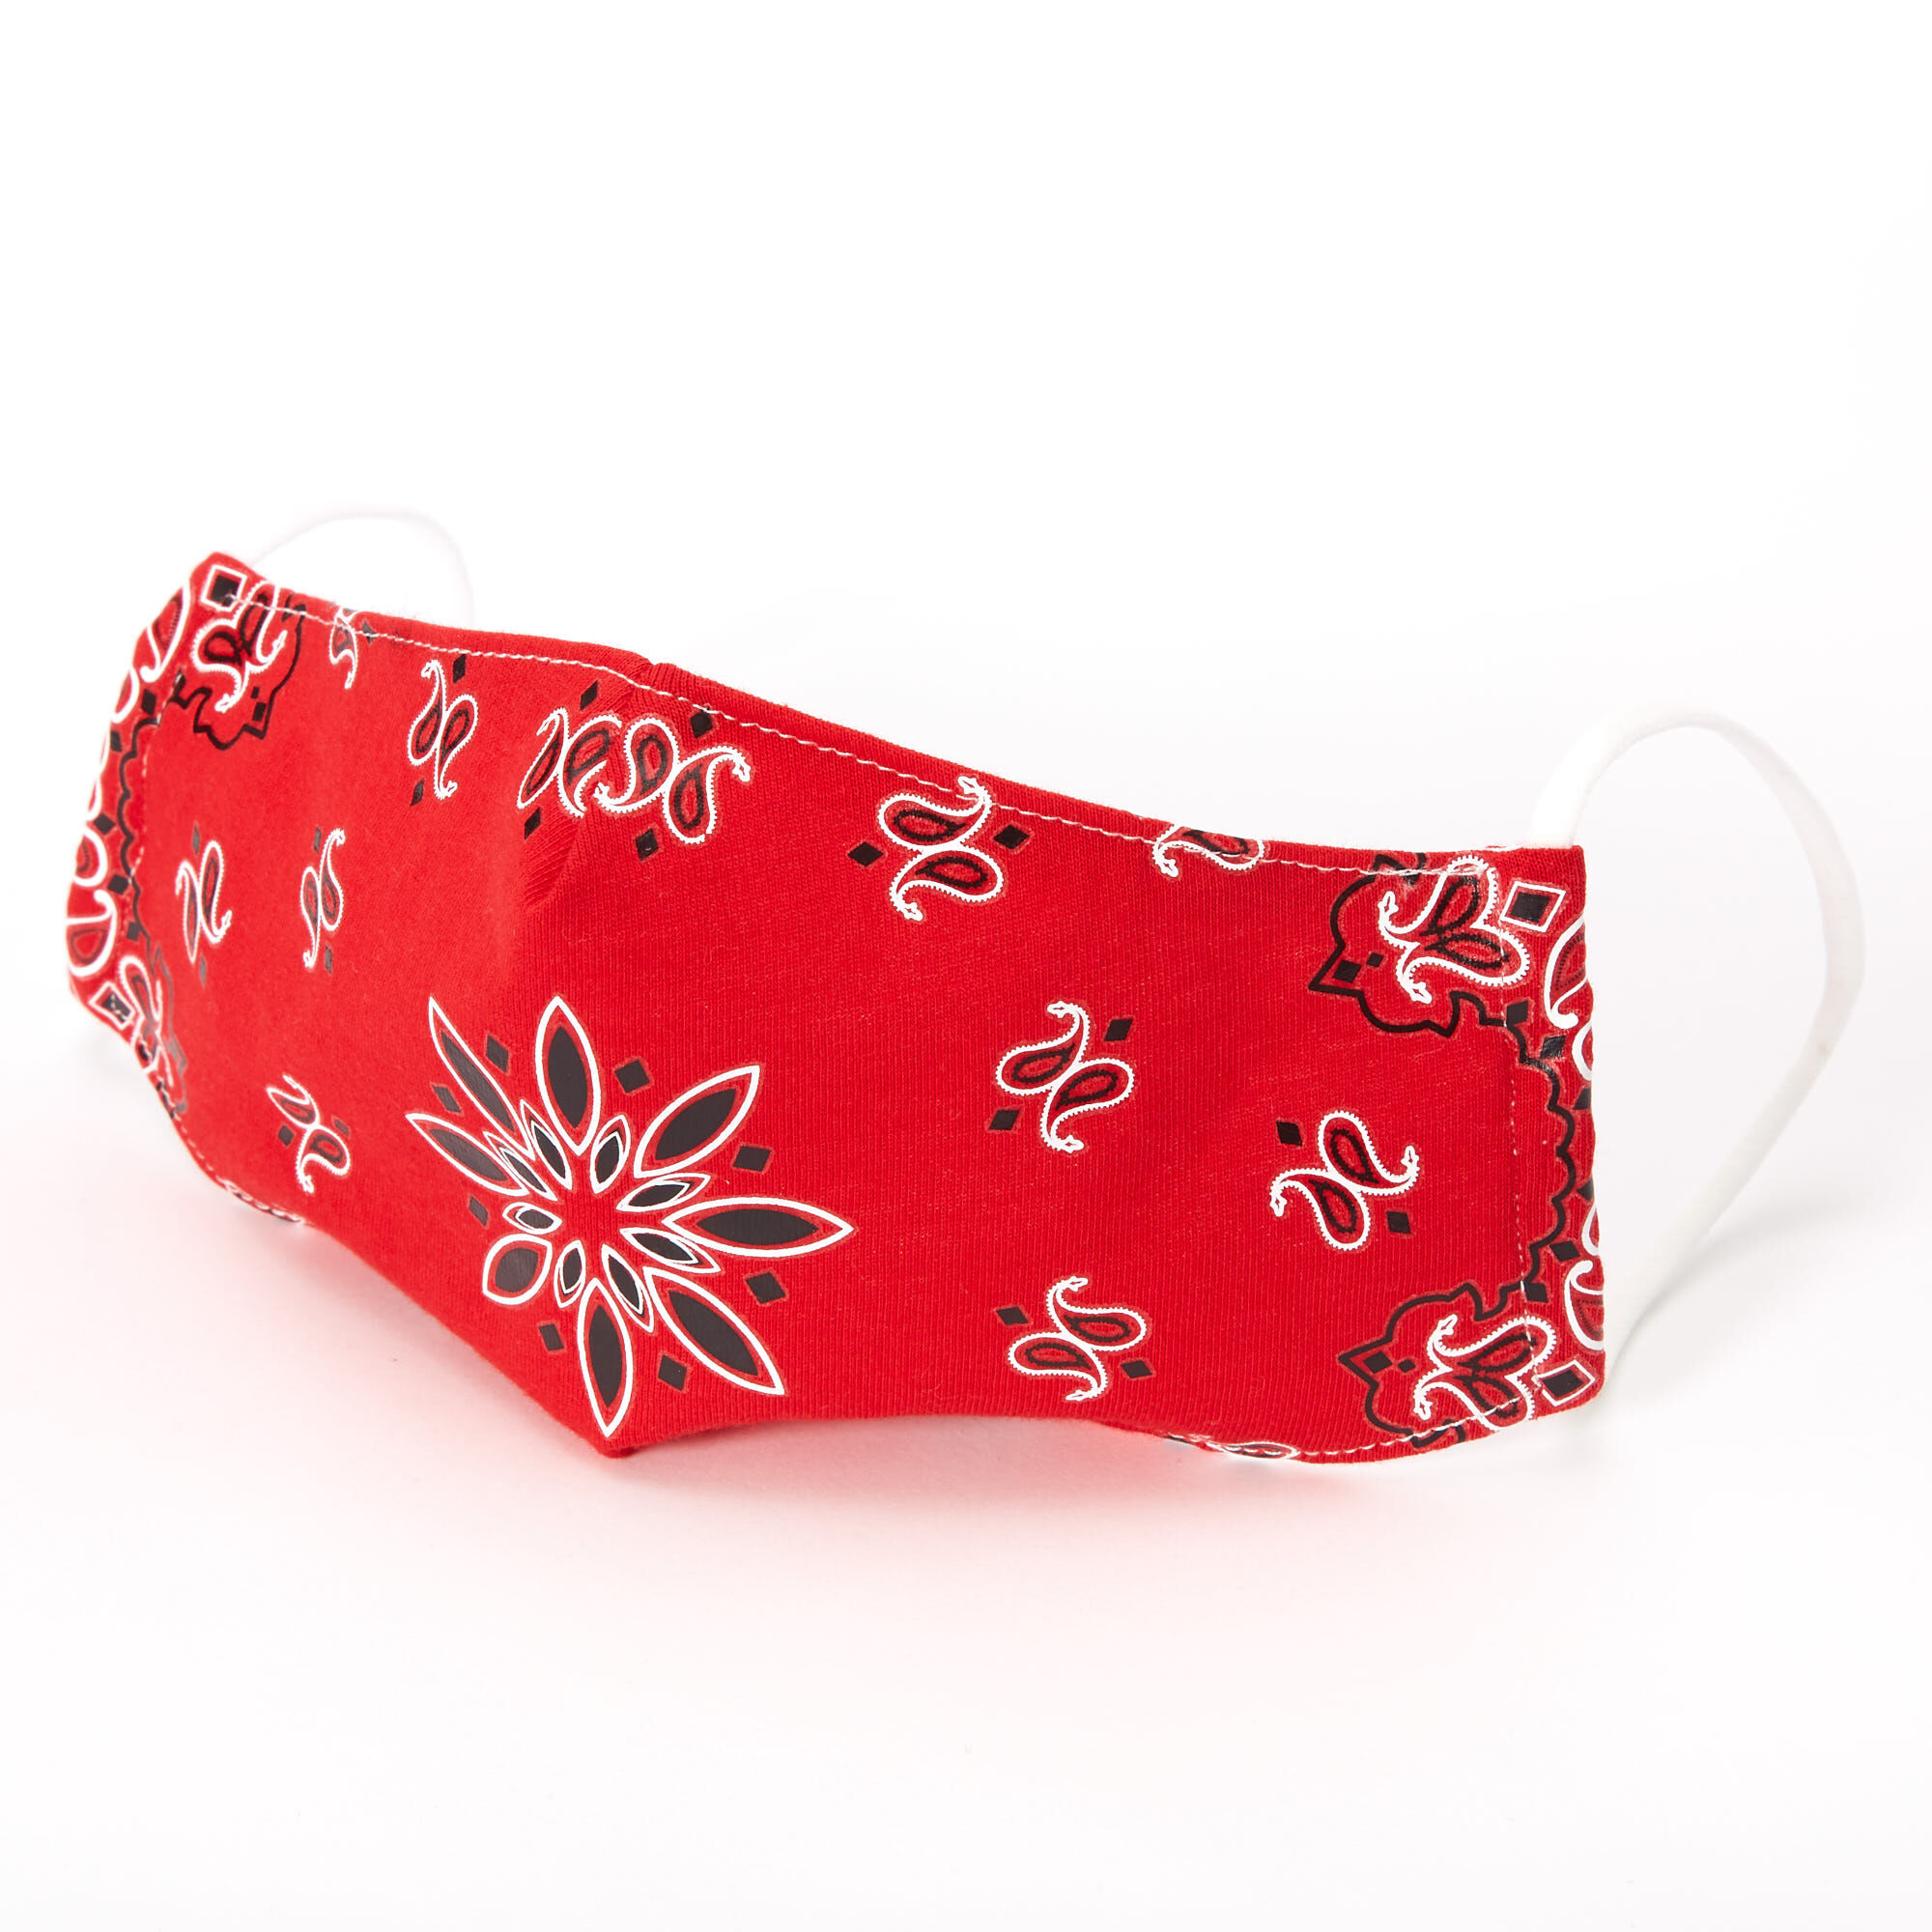 Spoontiques Fun Face Mask Washable Adjustable Ear Straps Red Bandana for sale online